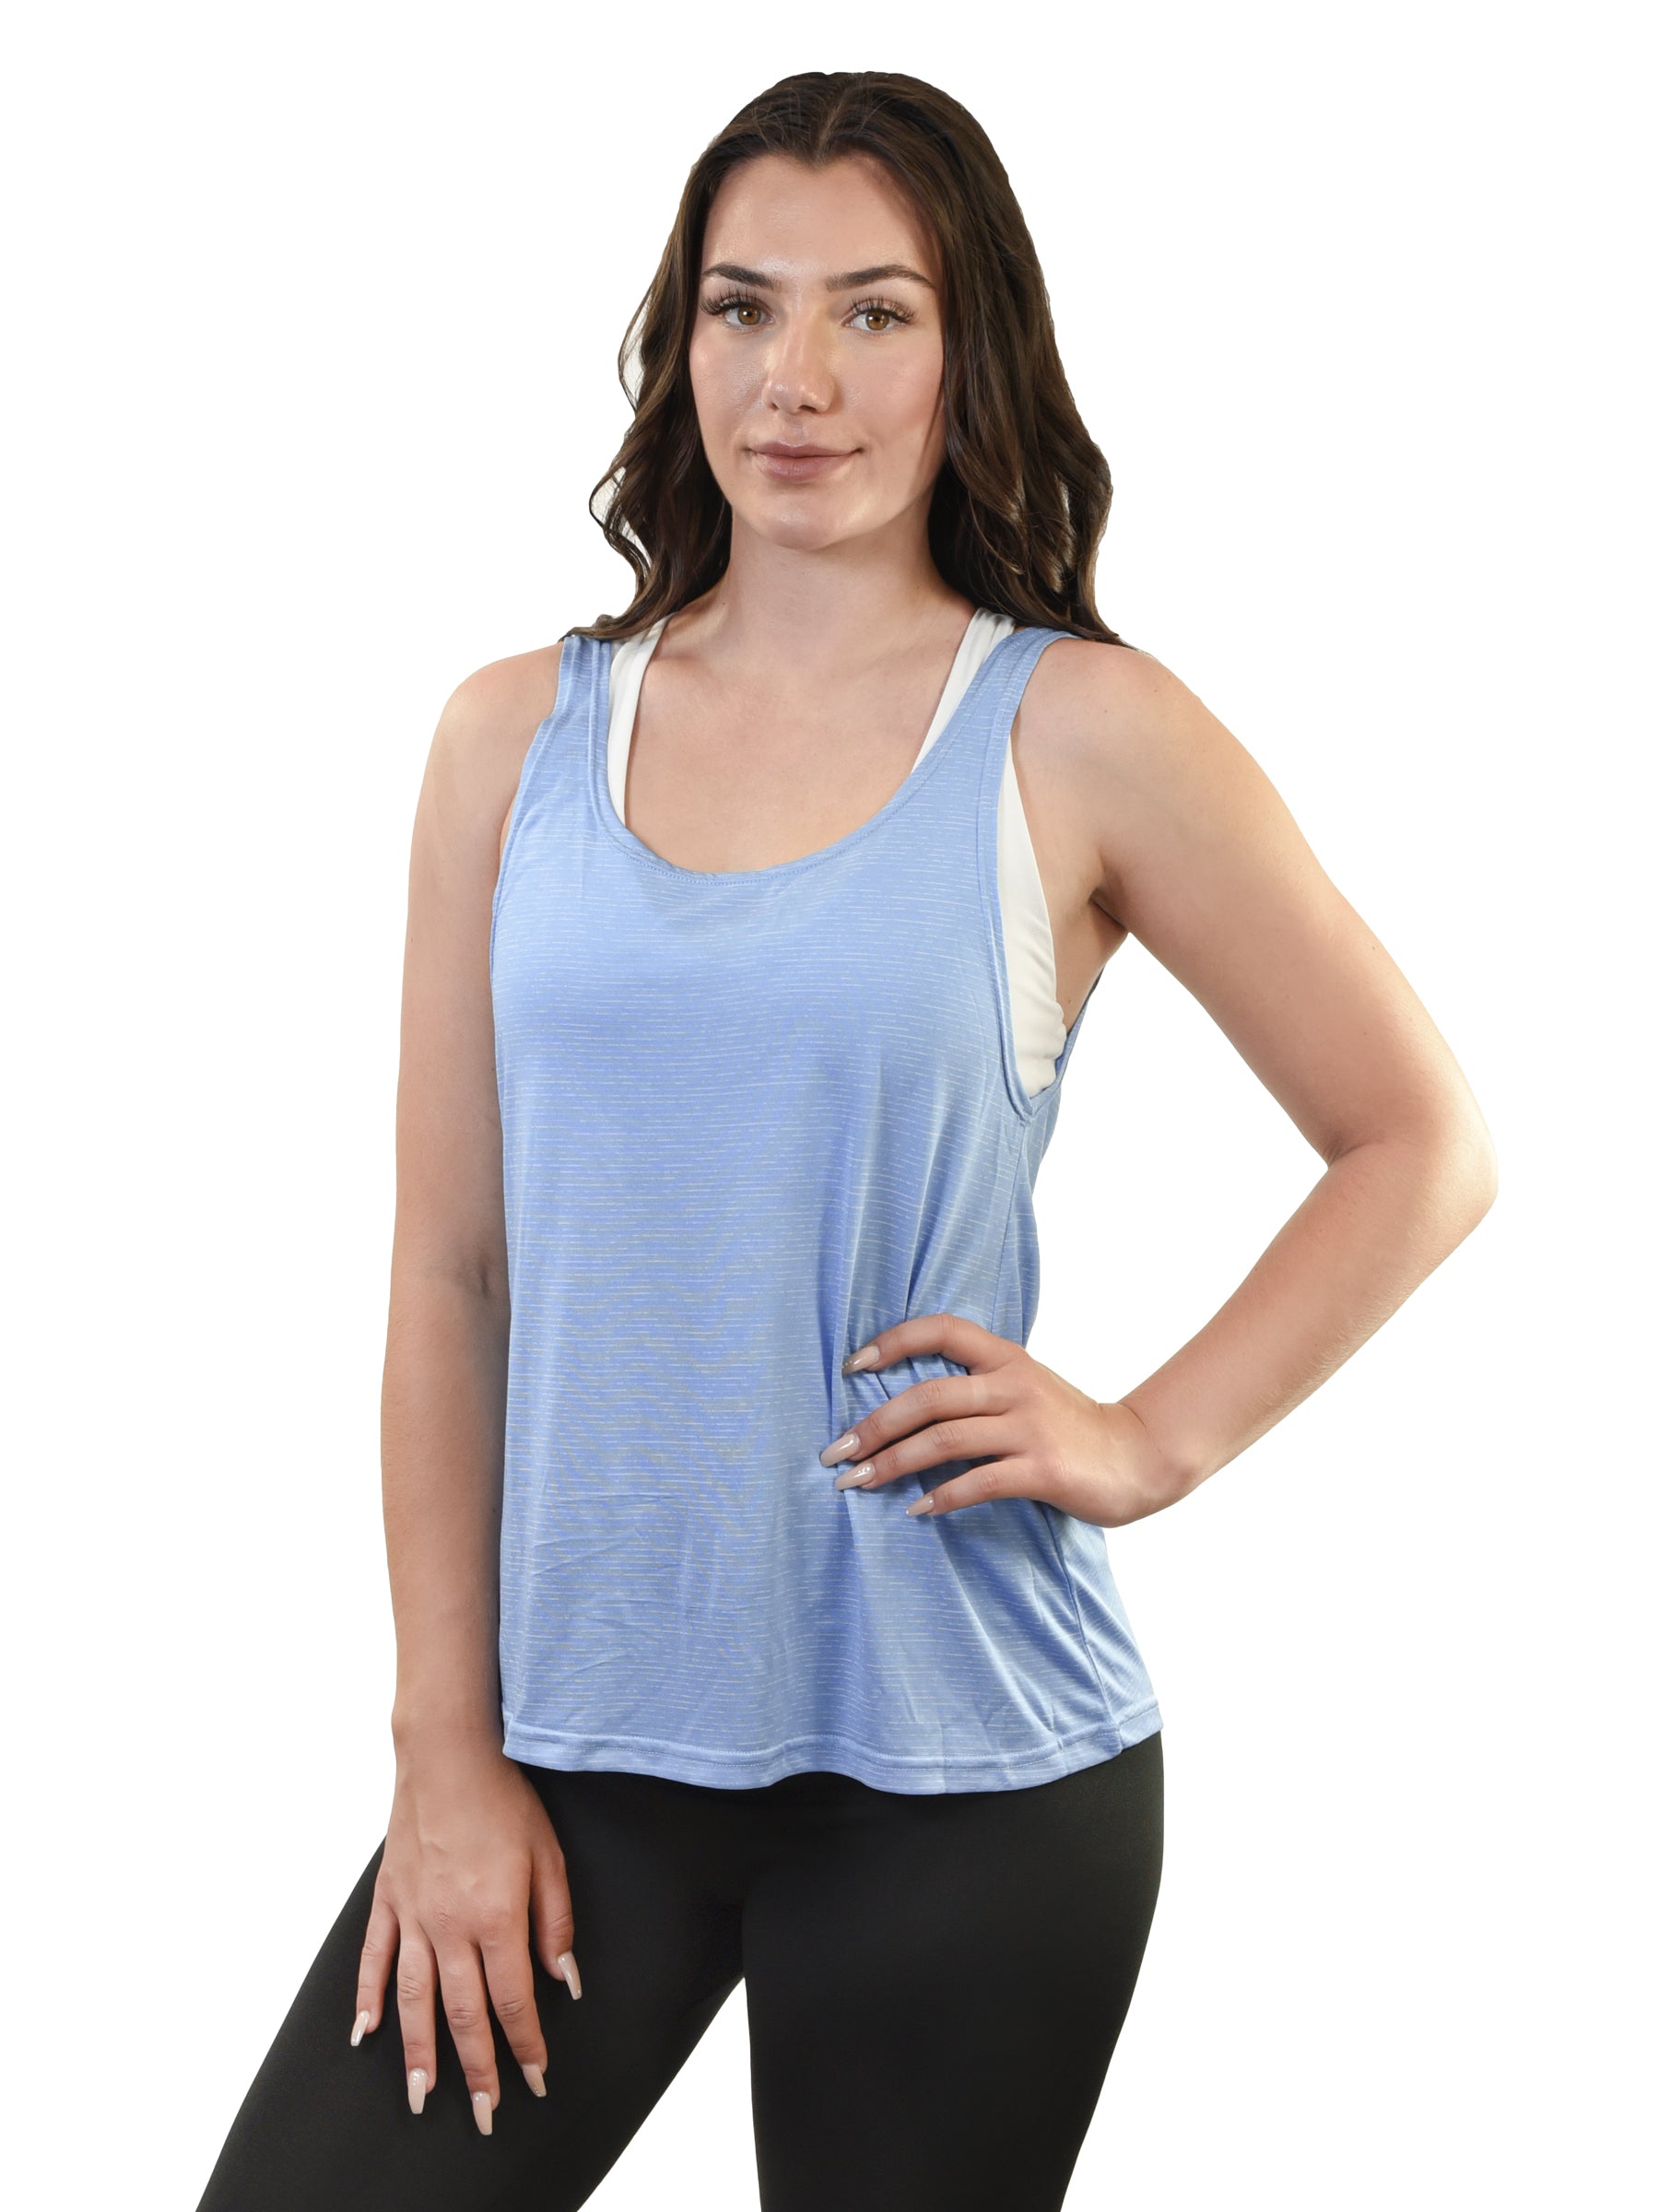 Model wearing Young USA Ladies Athletic Tank Top - Blue